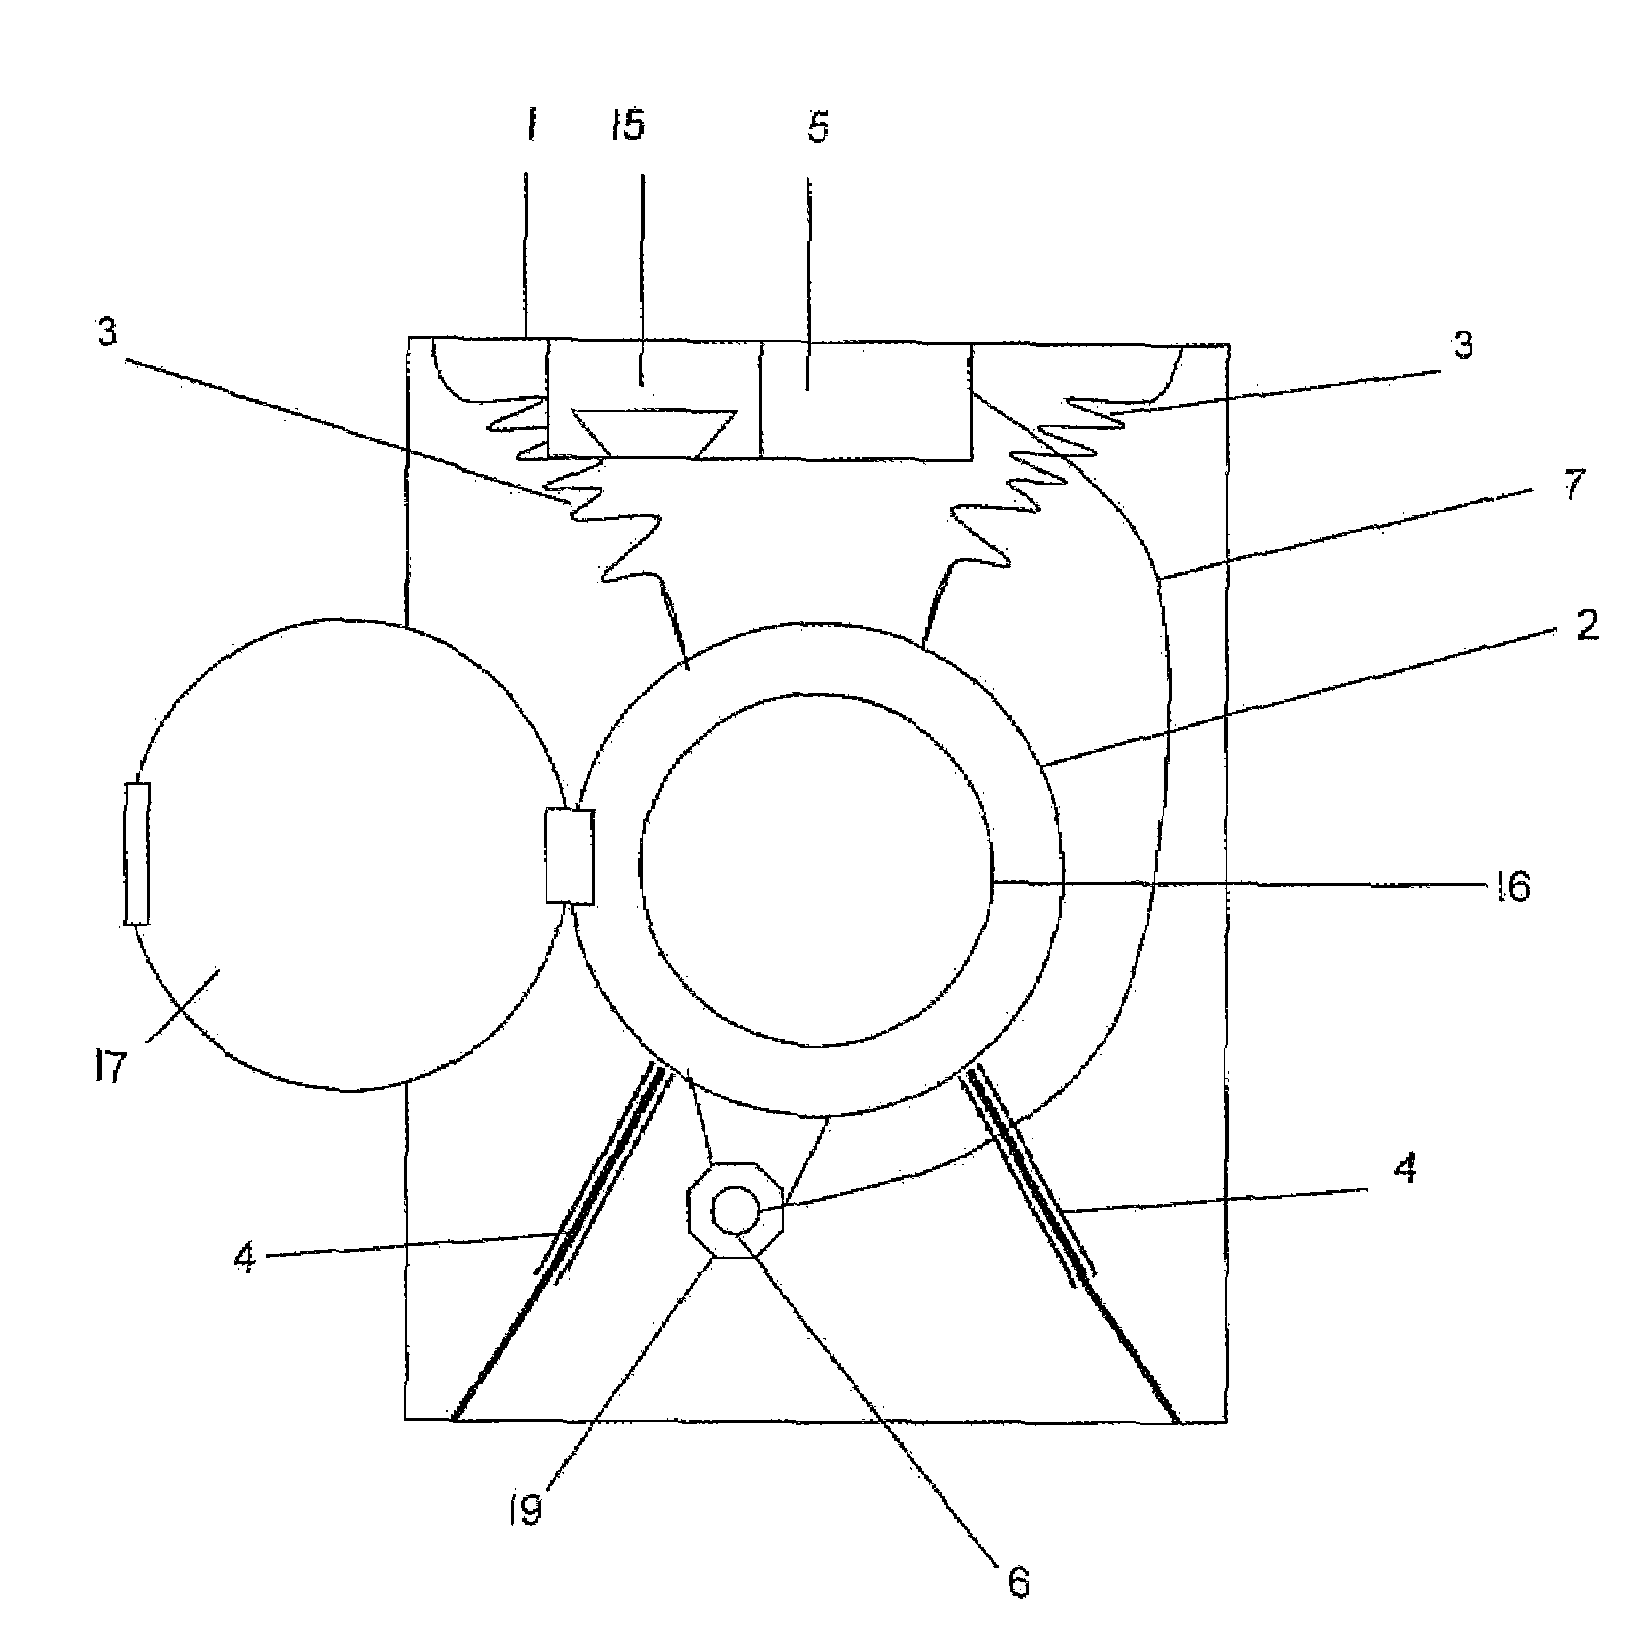 Method of monitoring the rotational movement of a washing machine drum